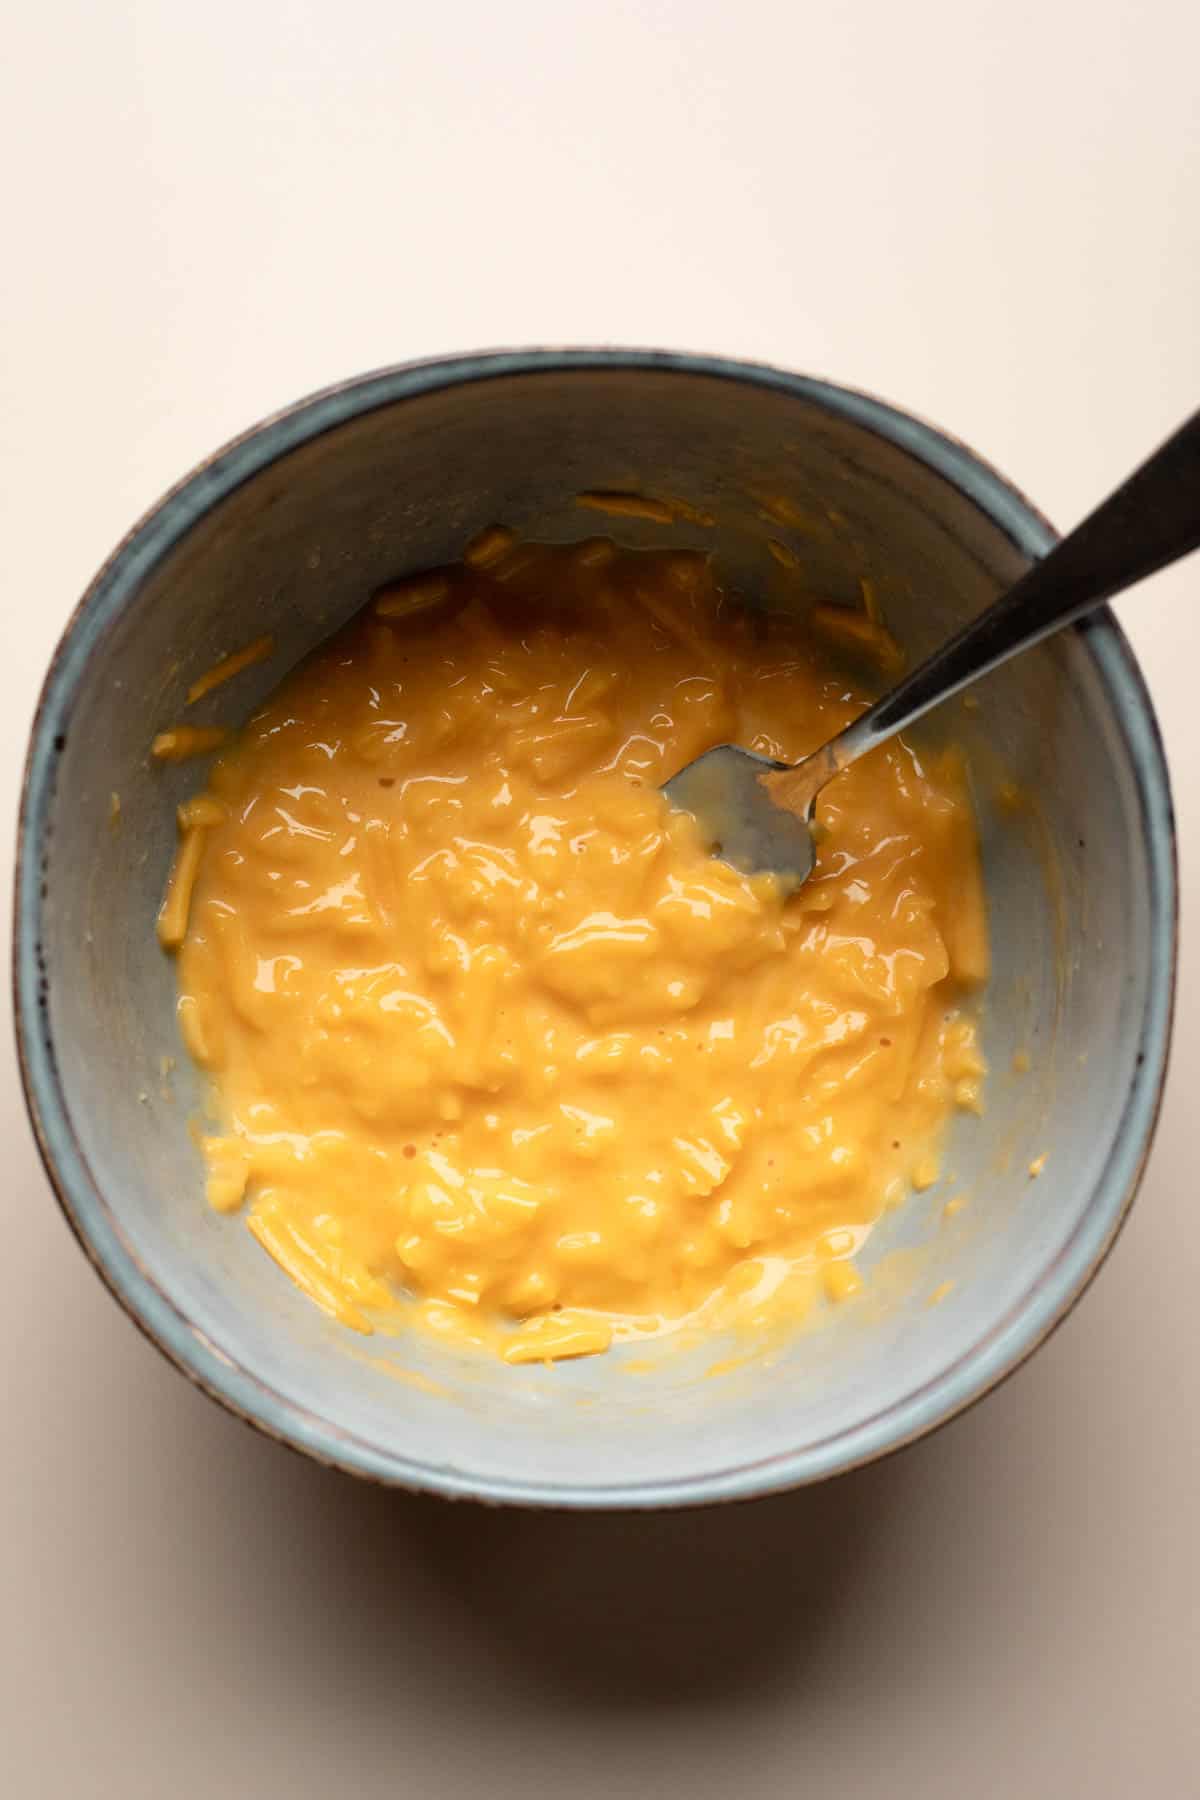 Melting shredded cheese in a bowl.